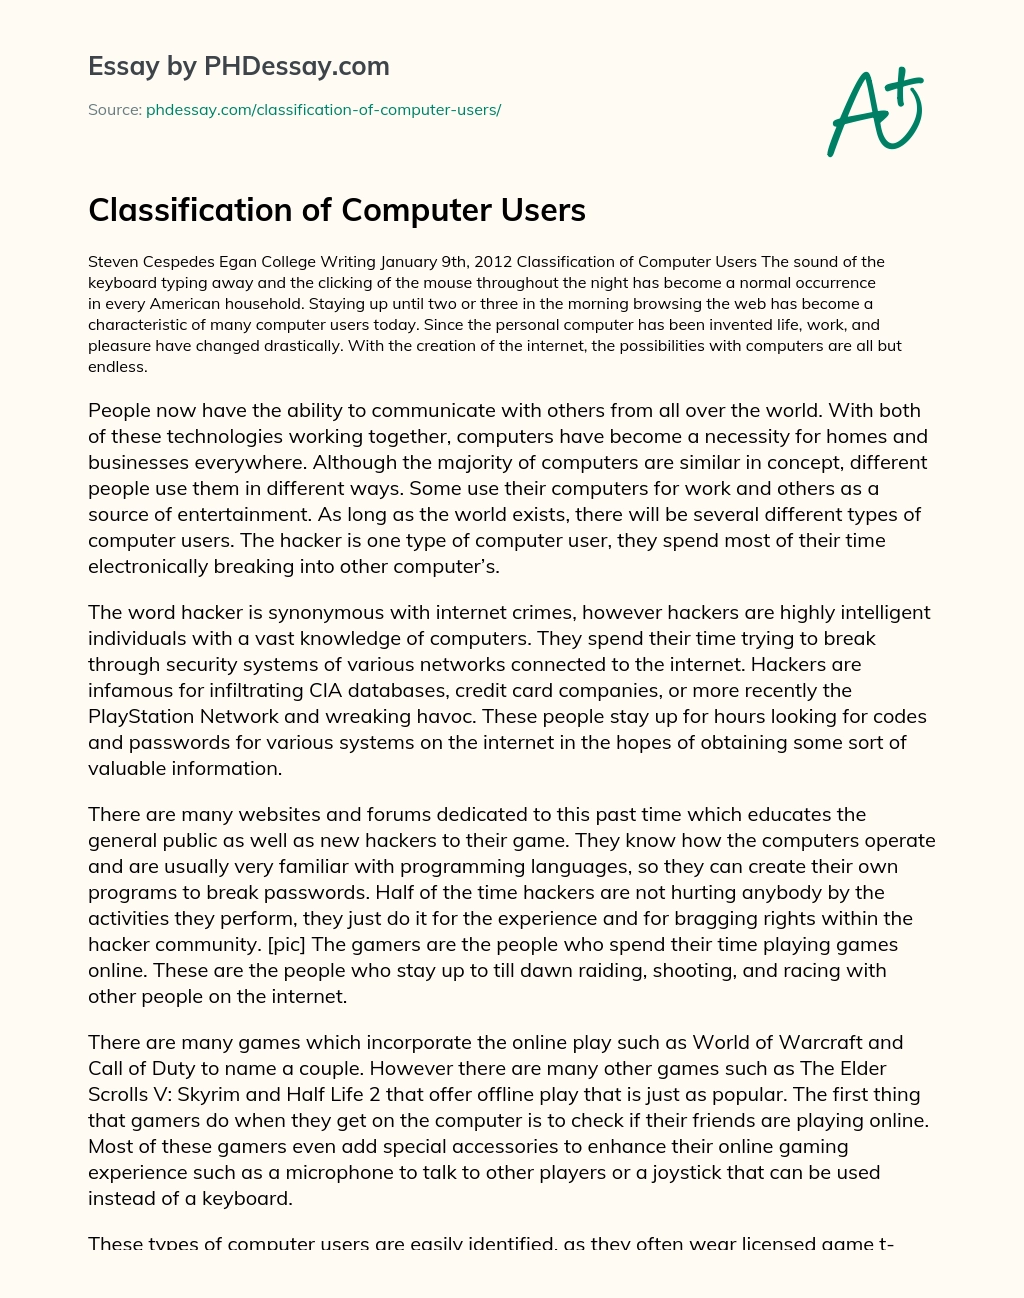 Classification of Computer Users essay